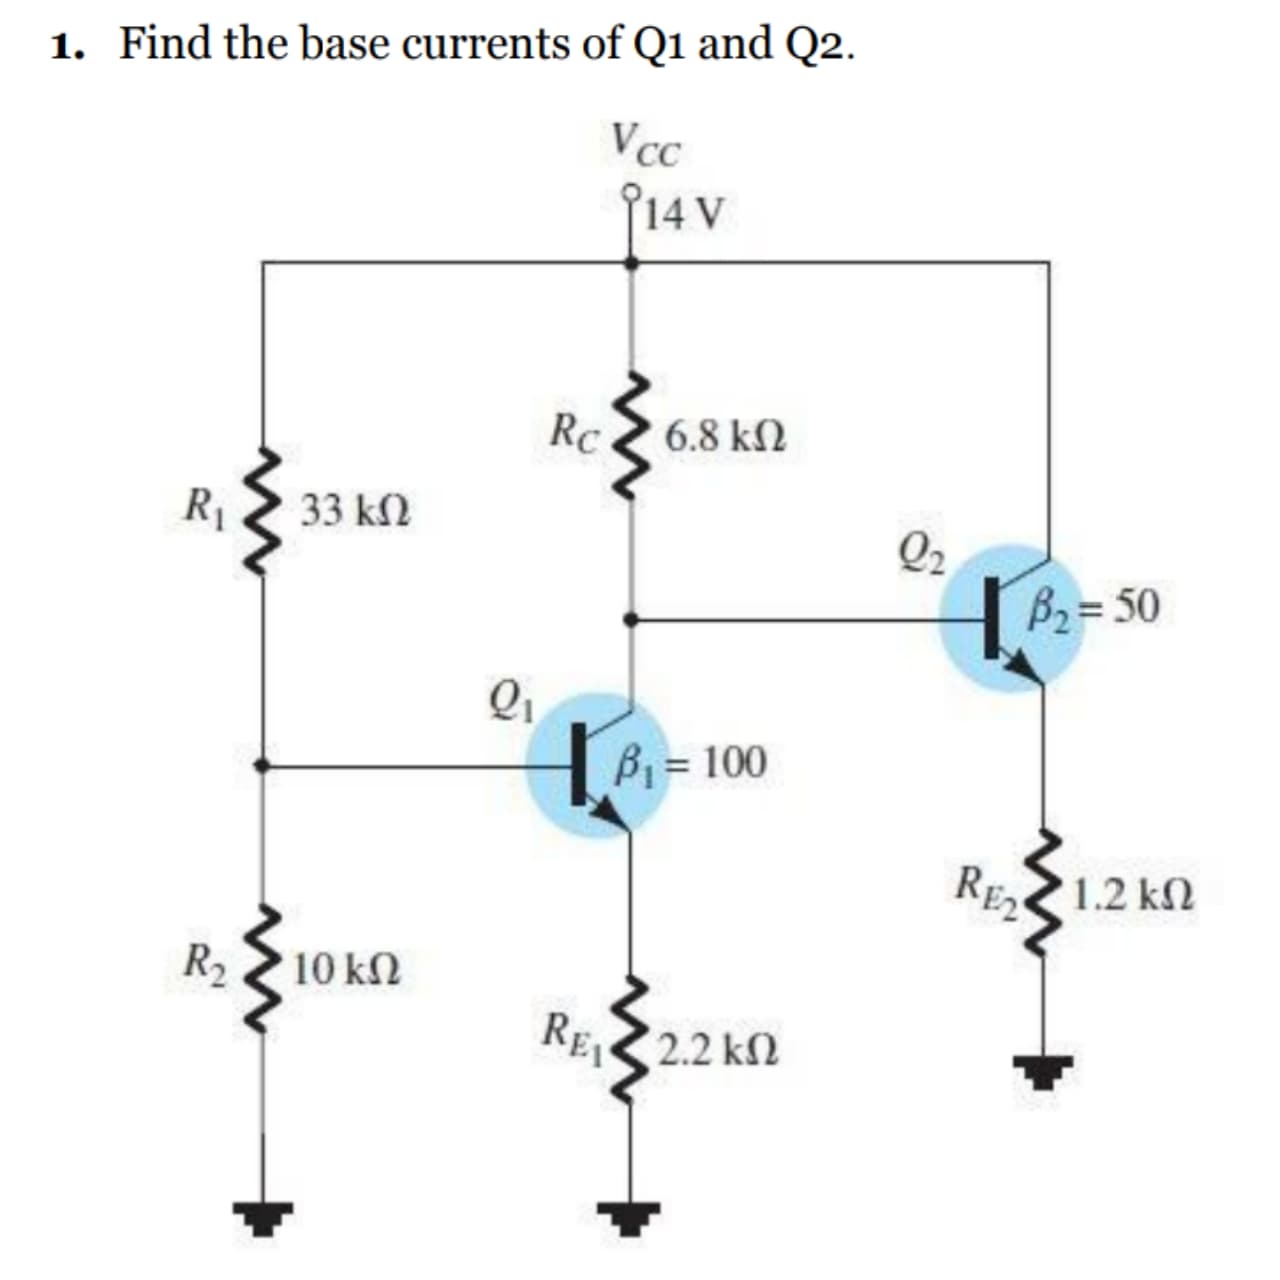 1. Find the base currents of Q1 and Q2.
Vcc
f14v
Rc
6.8 kN
R1
33 k2
Q2
B2= 50
B = 100
RE2
1.2 kN
R2 10 k
RE2.2 kN
